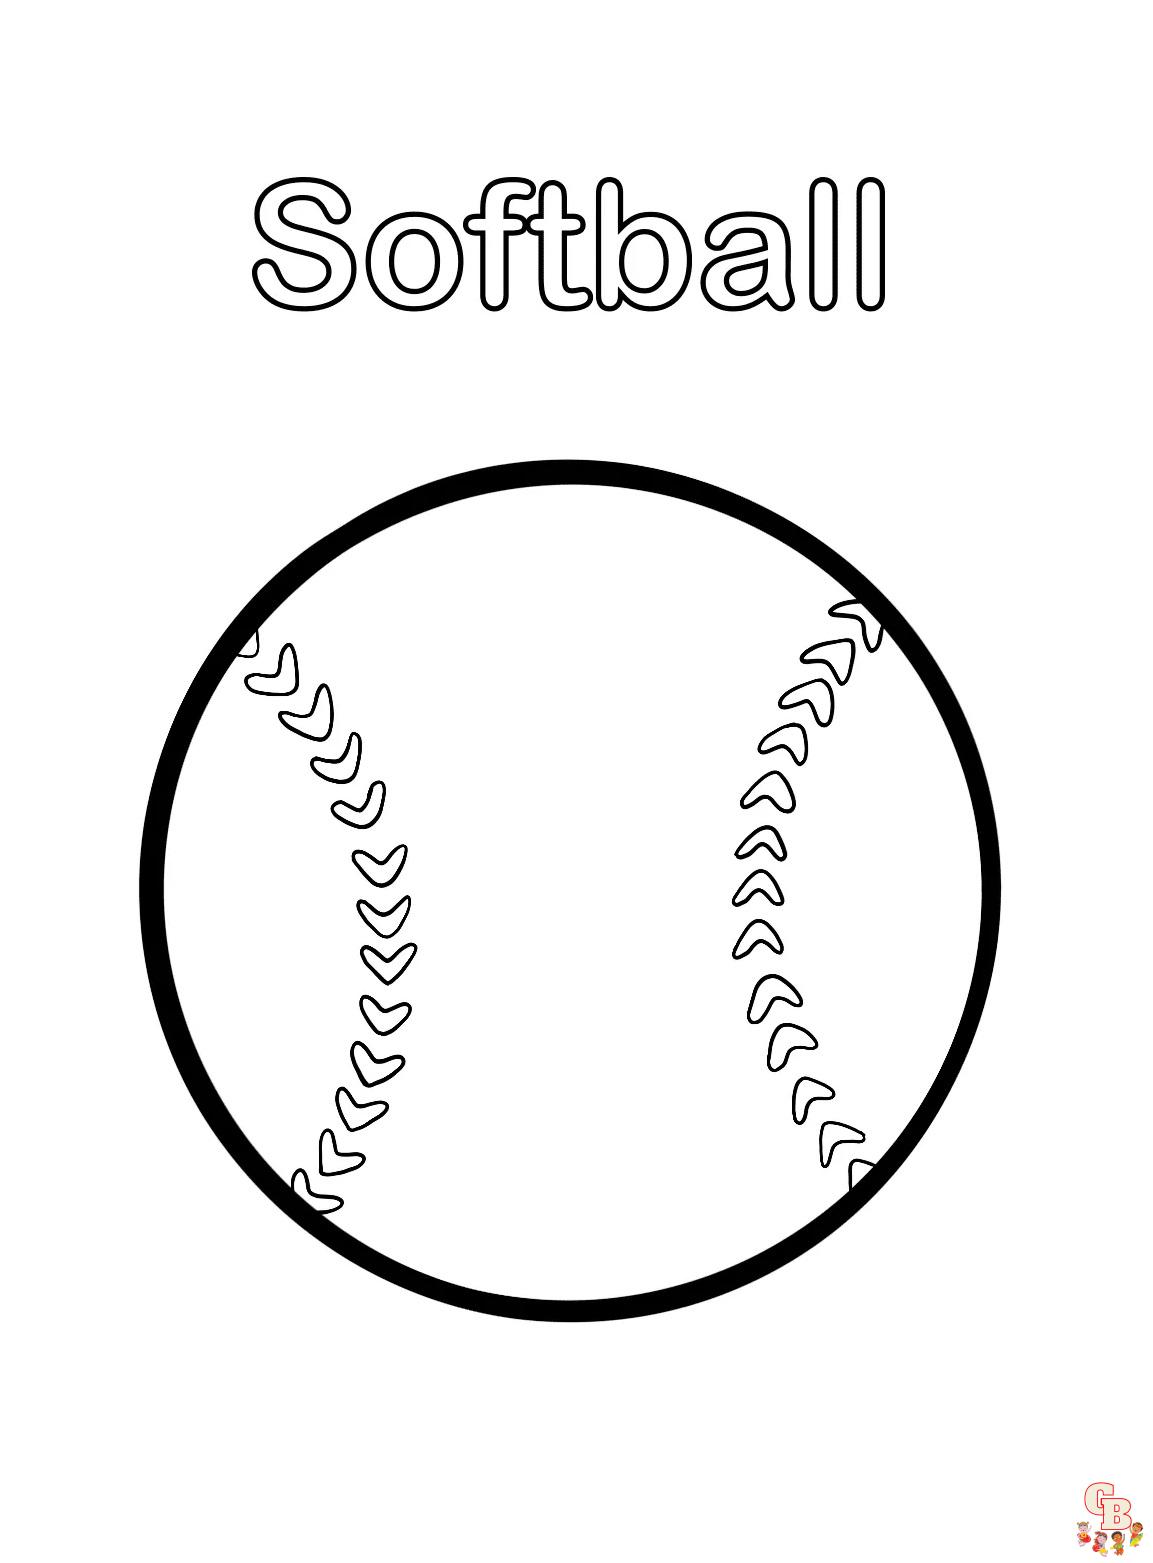 Softball Coloring Pages 2 1